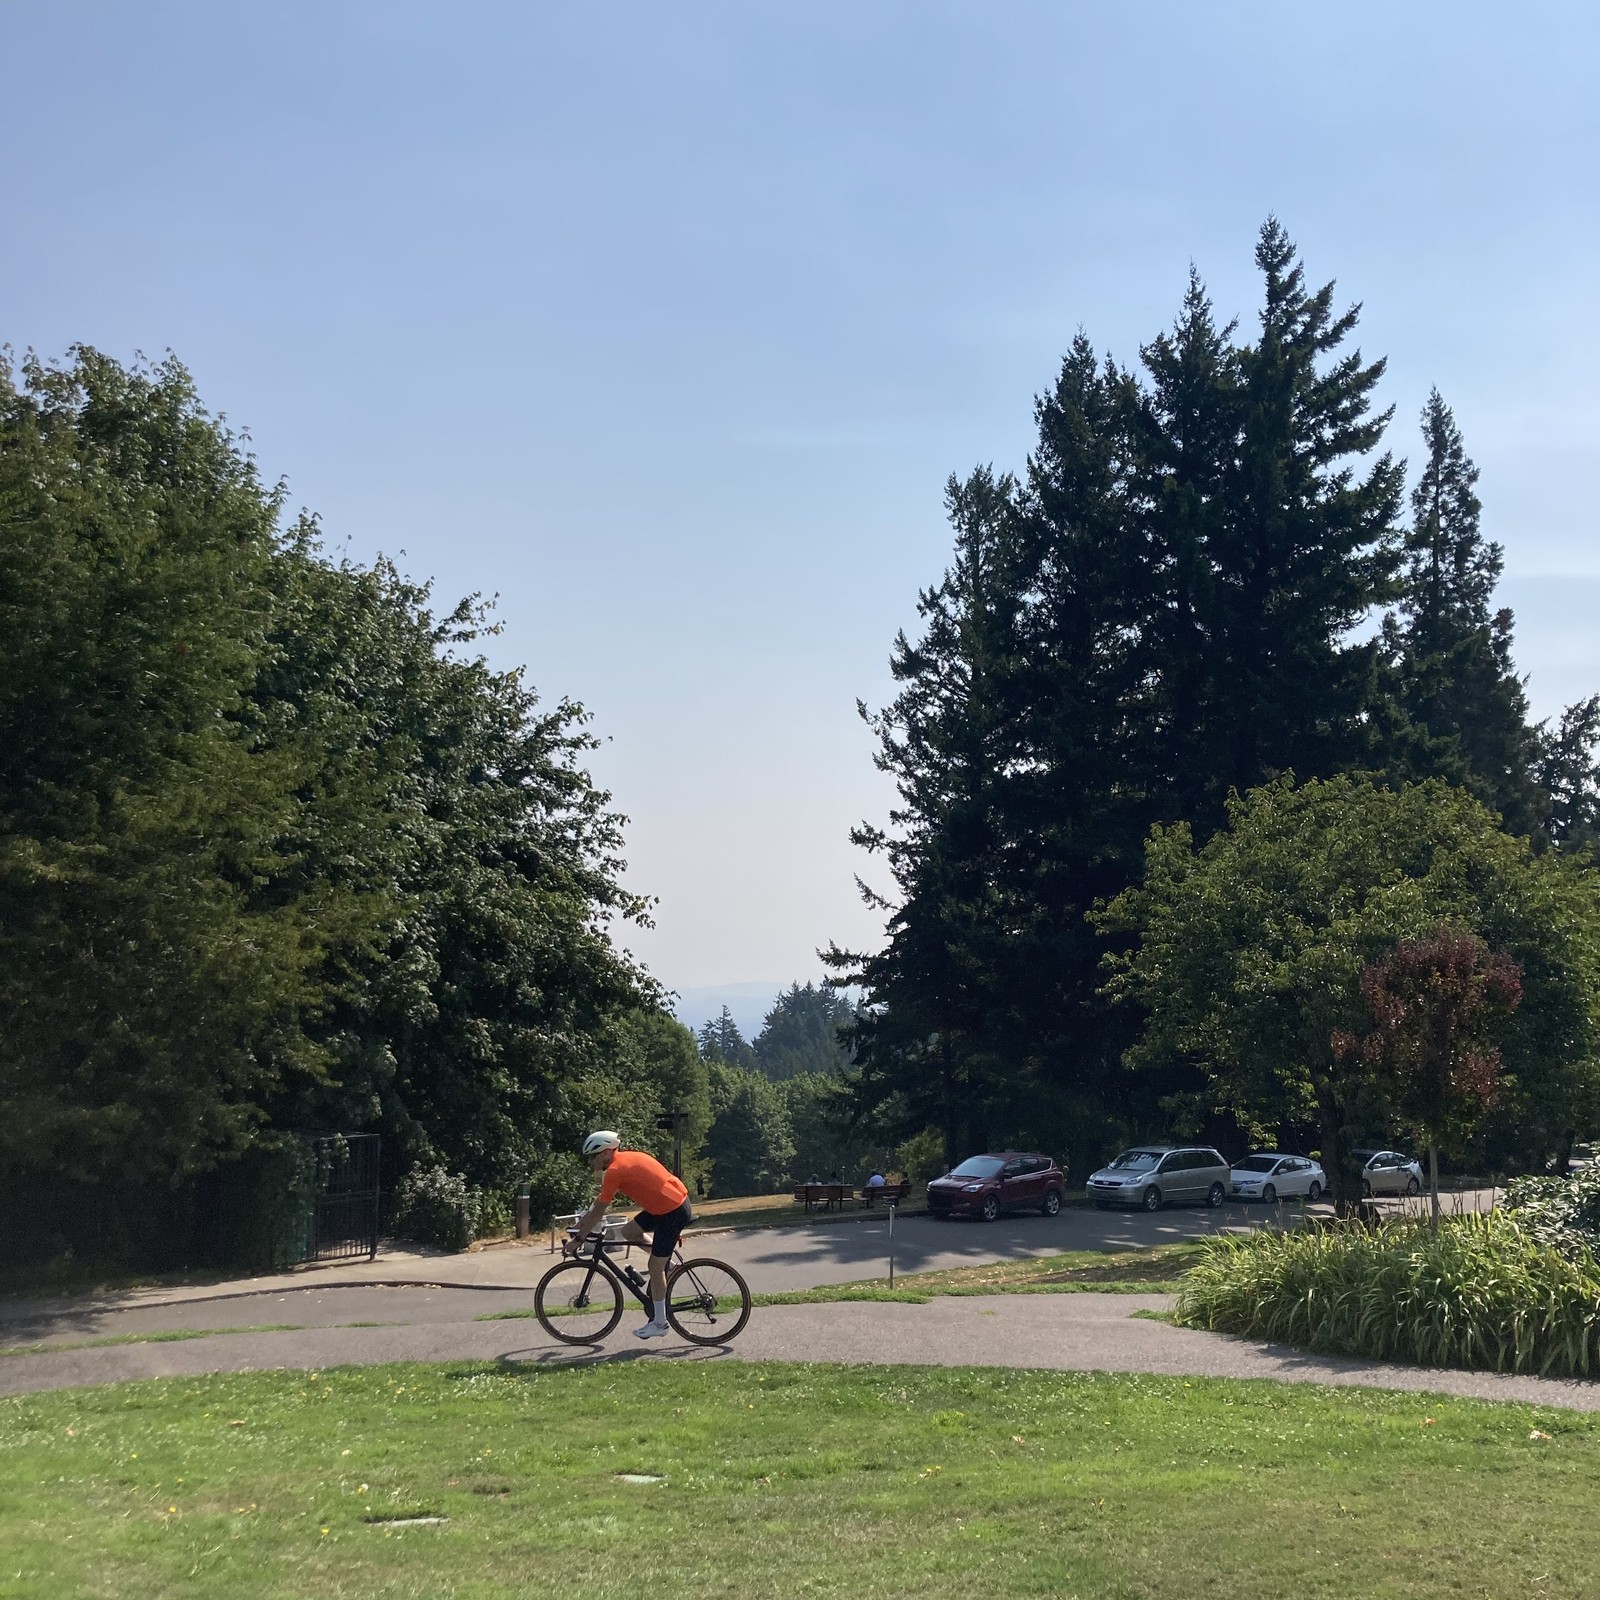 Mt Hood should be visible on this cloudless day but is not due to humidity and wildfire haze. In the foreground a cyclist rides past on the sidewalk